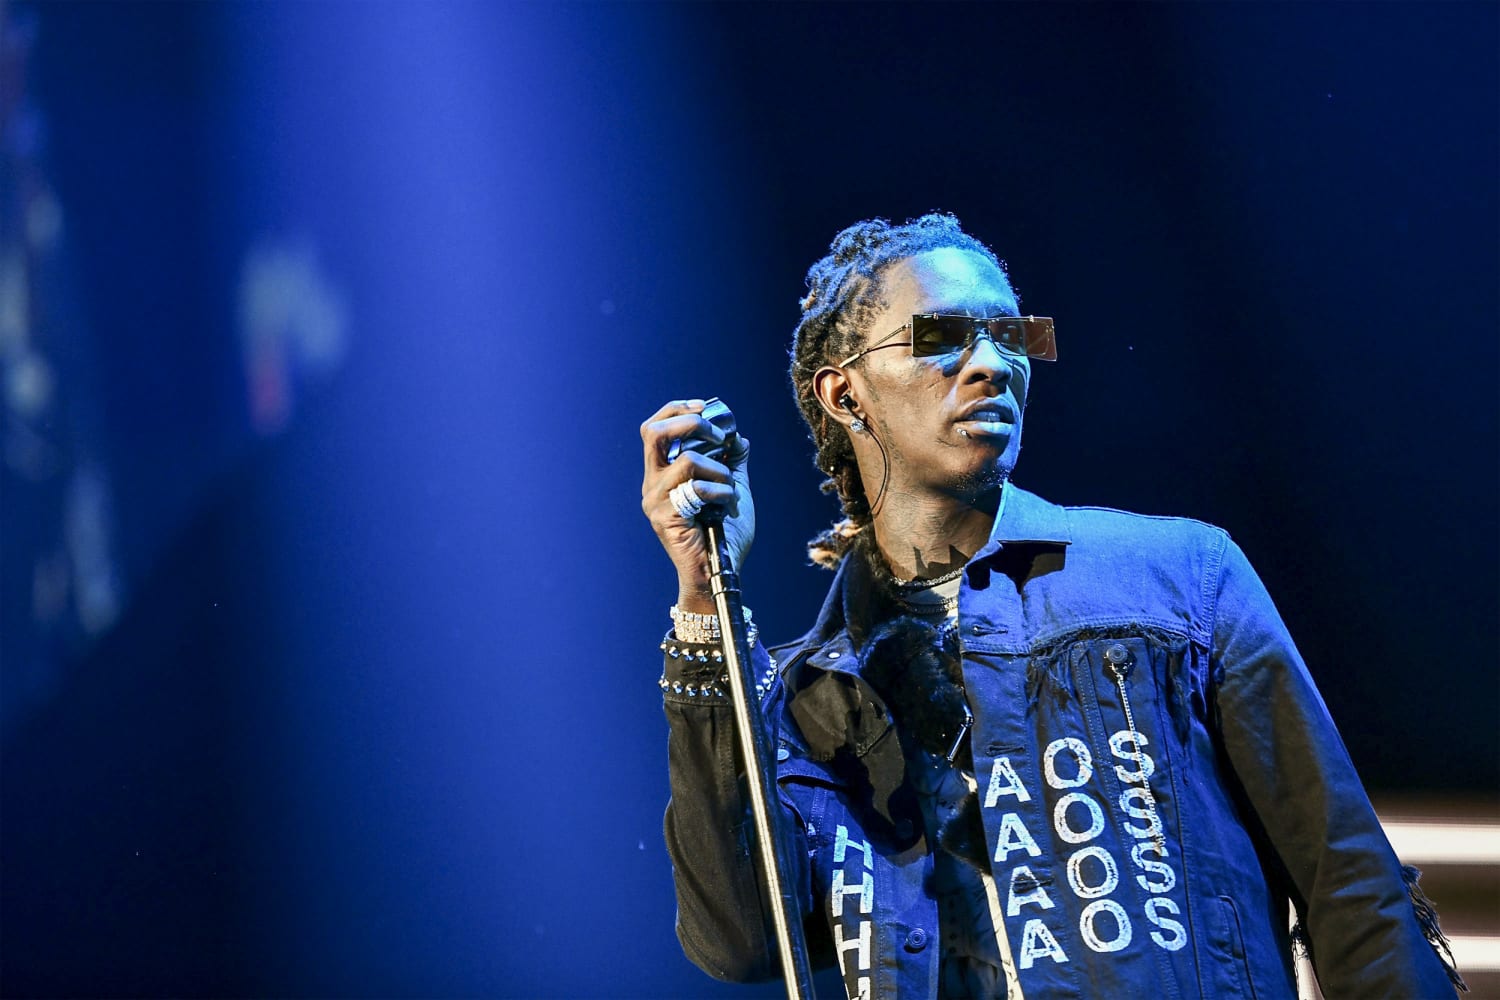 Atlanta rapper Young Thug faces 6 new felony charges in gang indictment